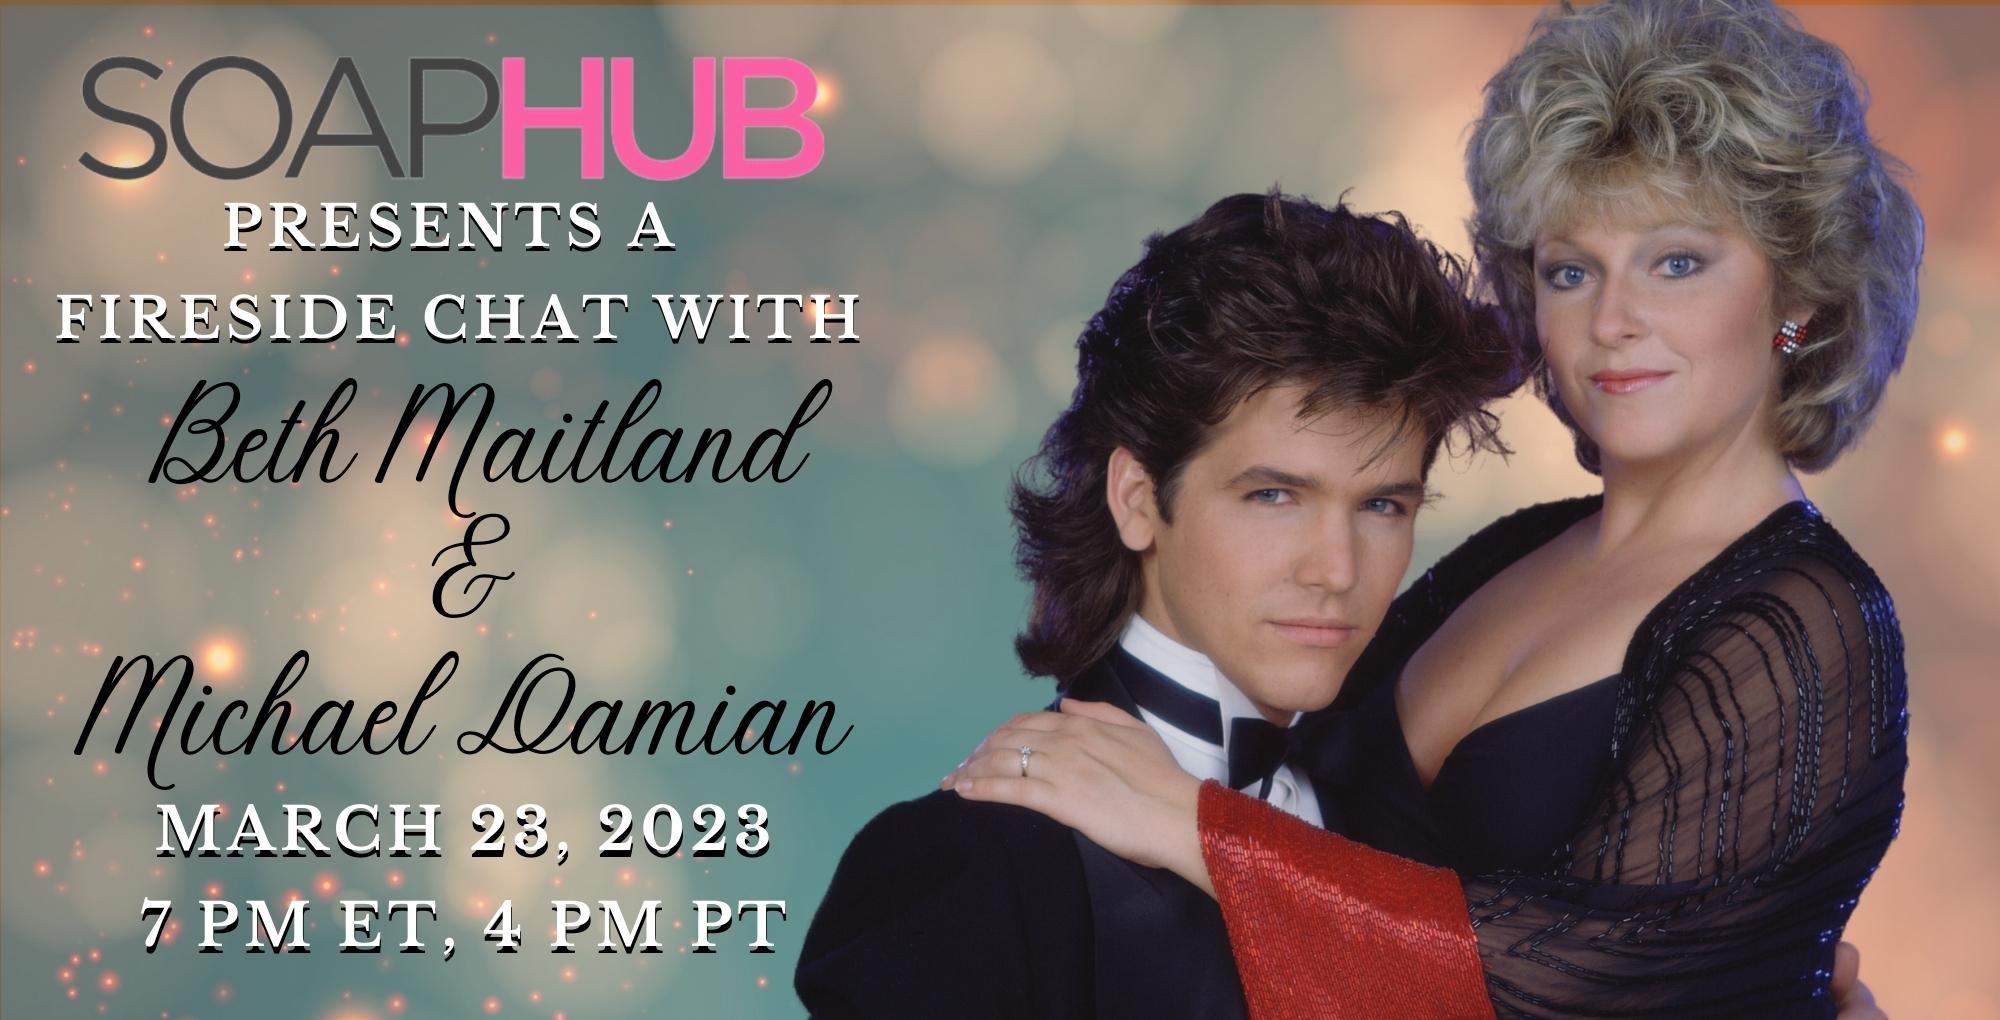 beth maitland and michael damian are joining soap hub for a fireside chat.